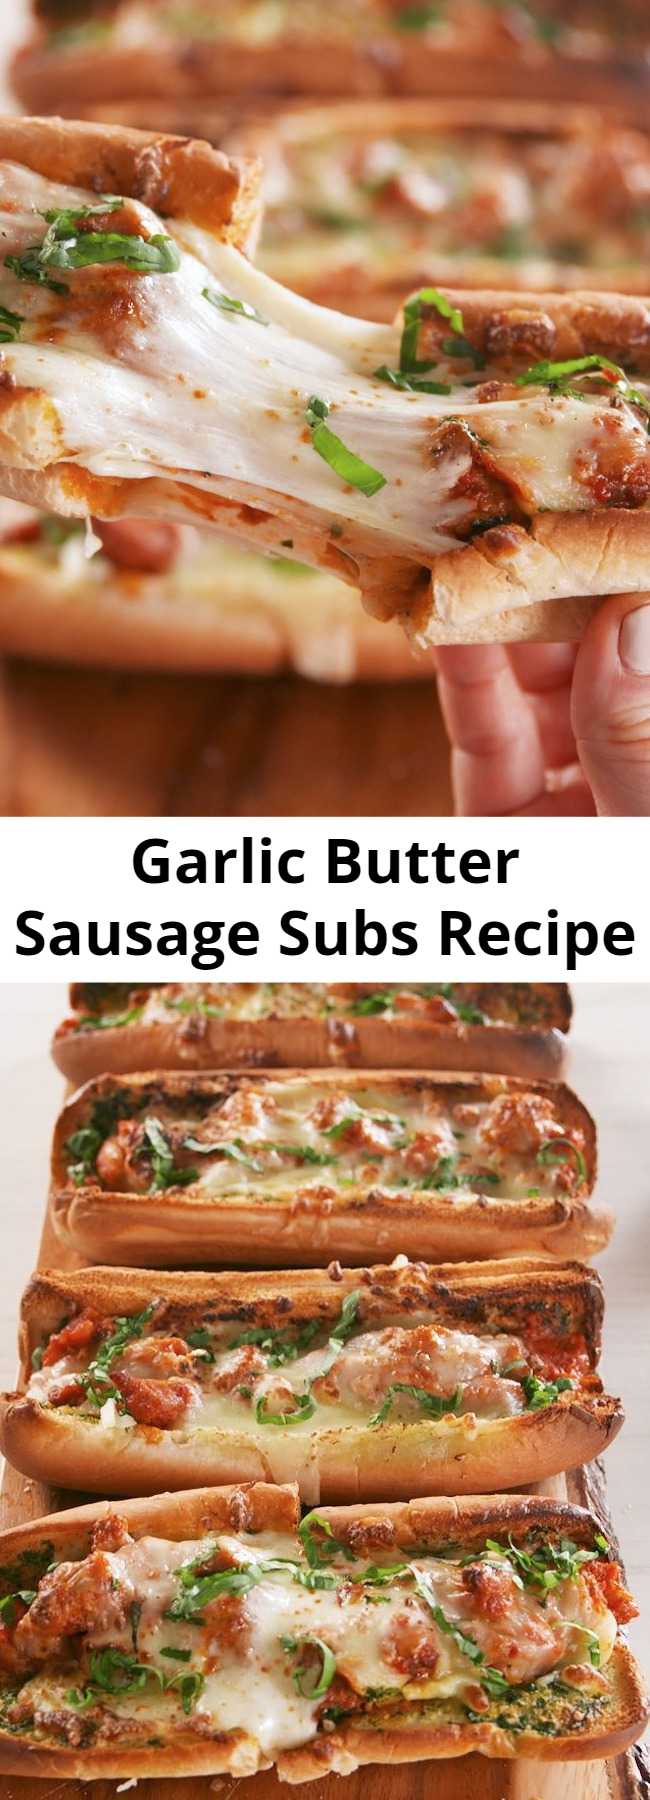 Garlic Butter Sausage Subs Recipe - Crunchy on the outside, soft on the inside. #easyrecipe #sausage #subs #sandwich #garlic